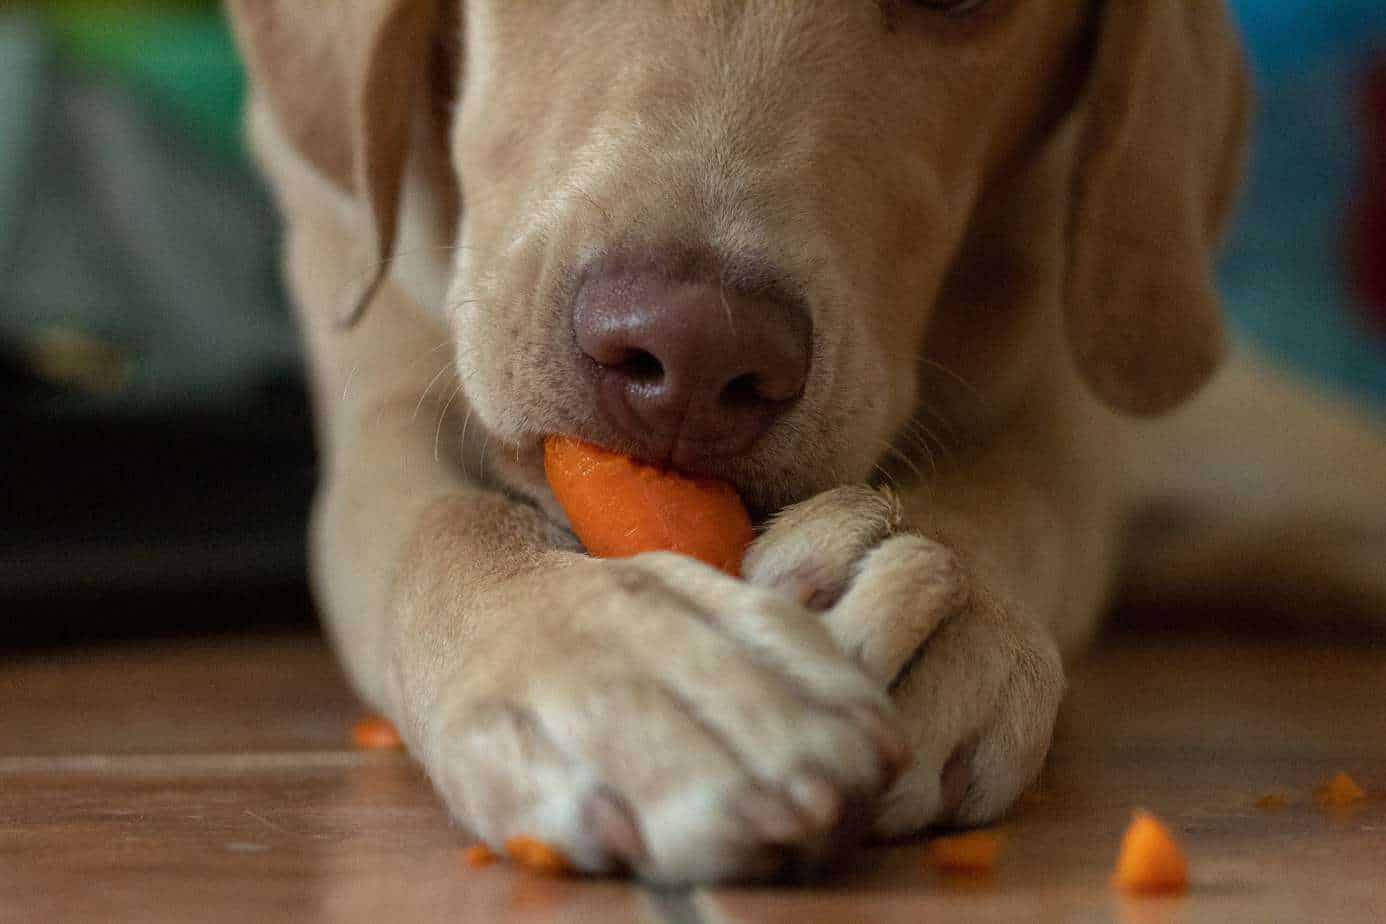 Labrador eats carrots, which are part of a healthy dog diet